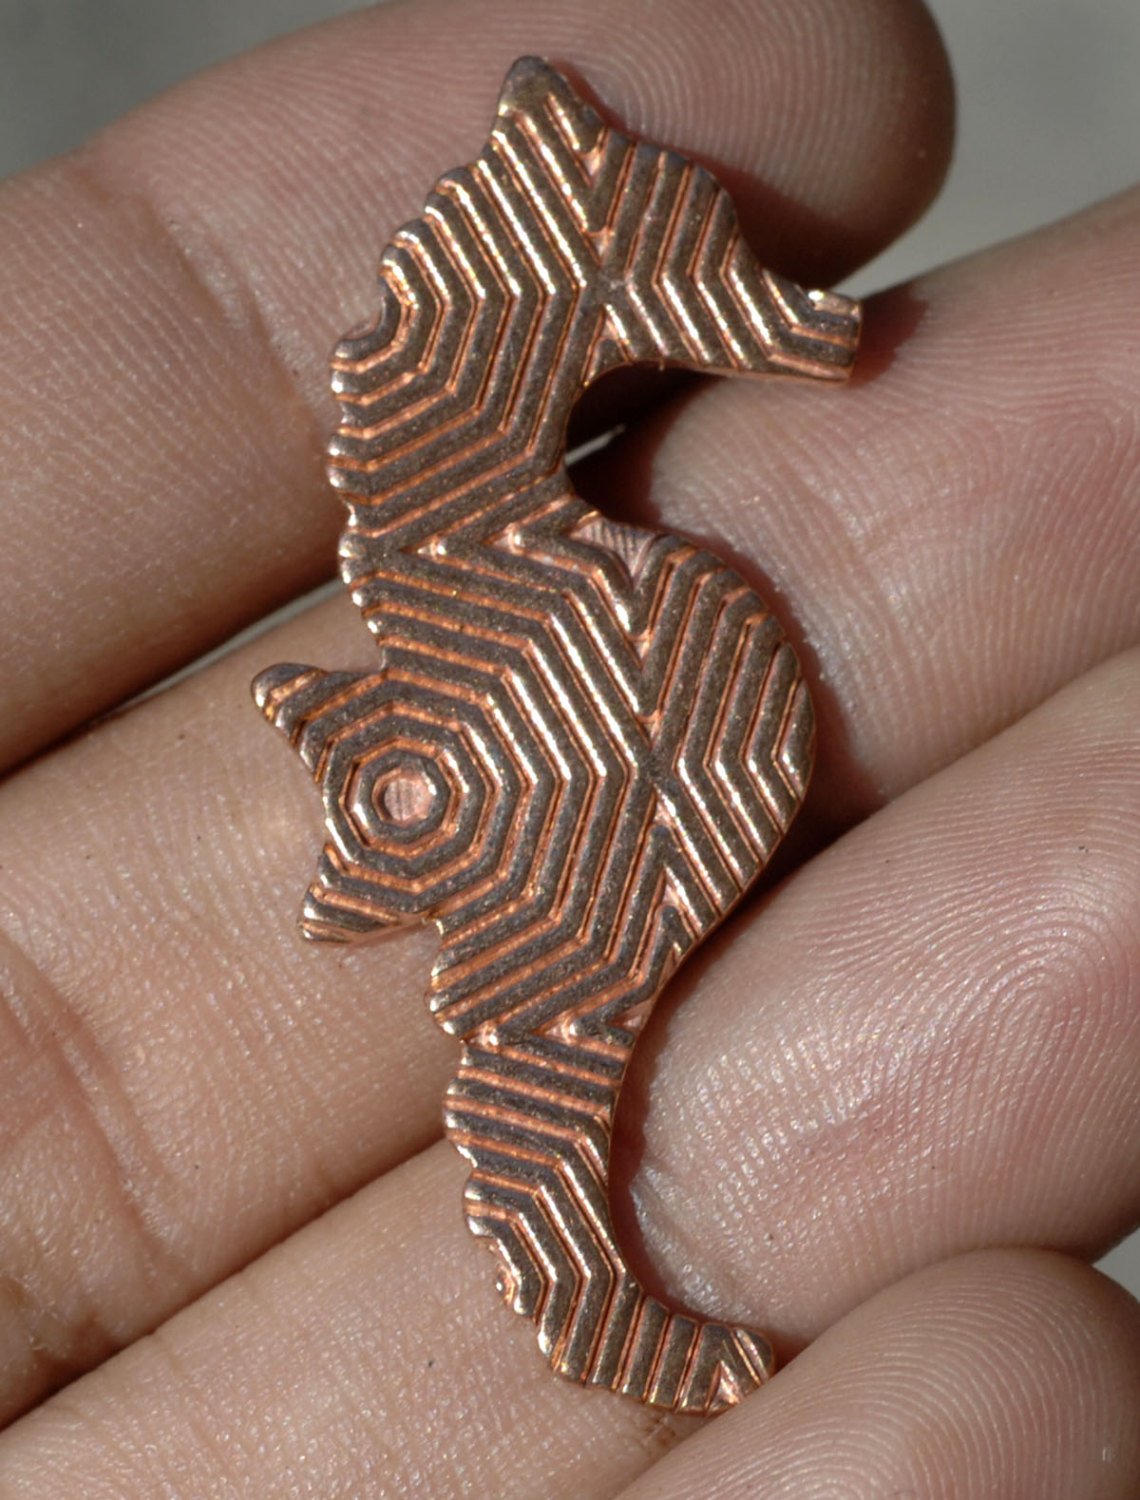 Seahorse Blank Cutout 41mm x 19mm Variety of Metal, Metalworking Blanks Hexagon Texture - 4 pieces